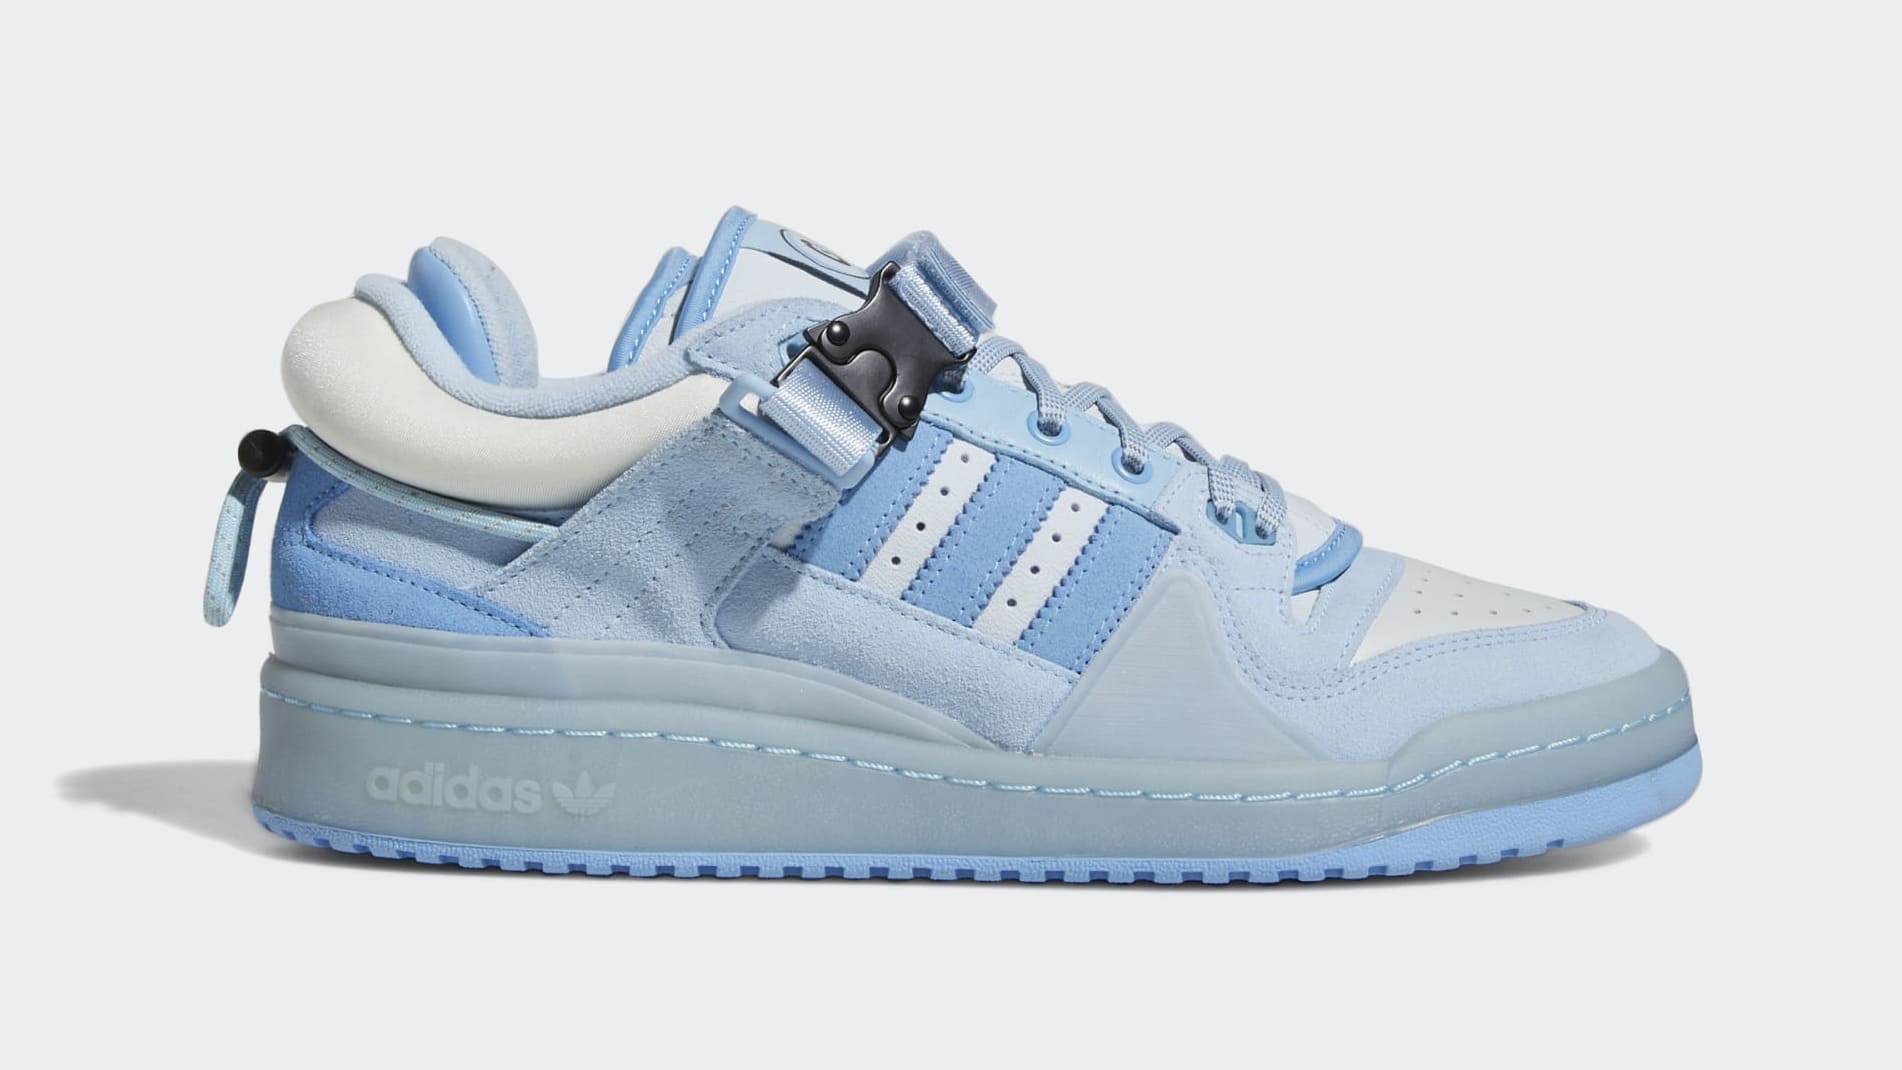 Bad Bunny x Adidas Forum Buckle Low 'Blue' GY9693 Lateral